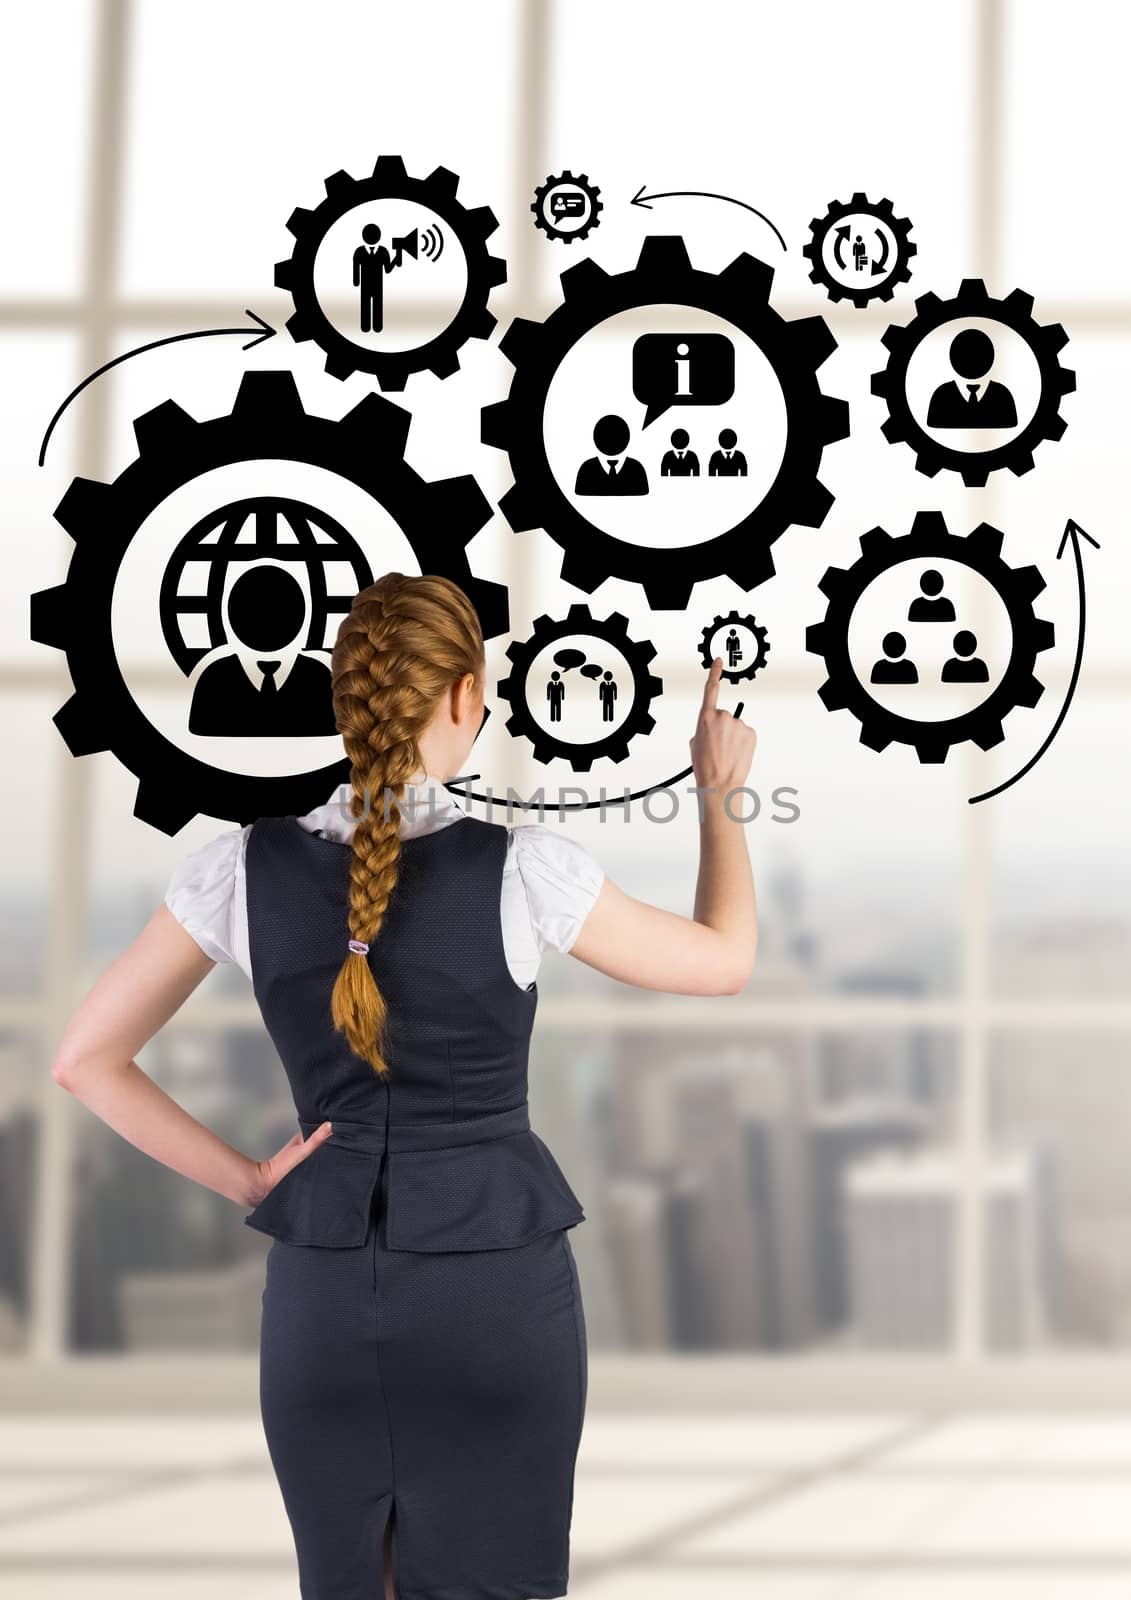 Business woman interacting with people in cogs graphics against office background by Wavebreakmedia